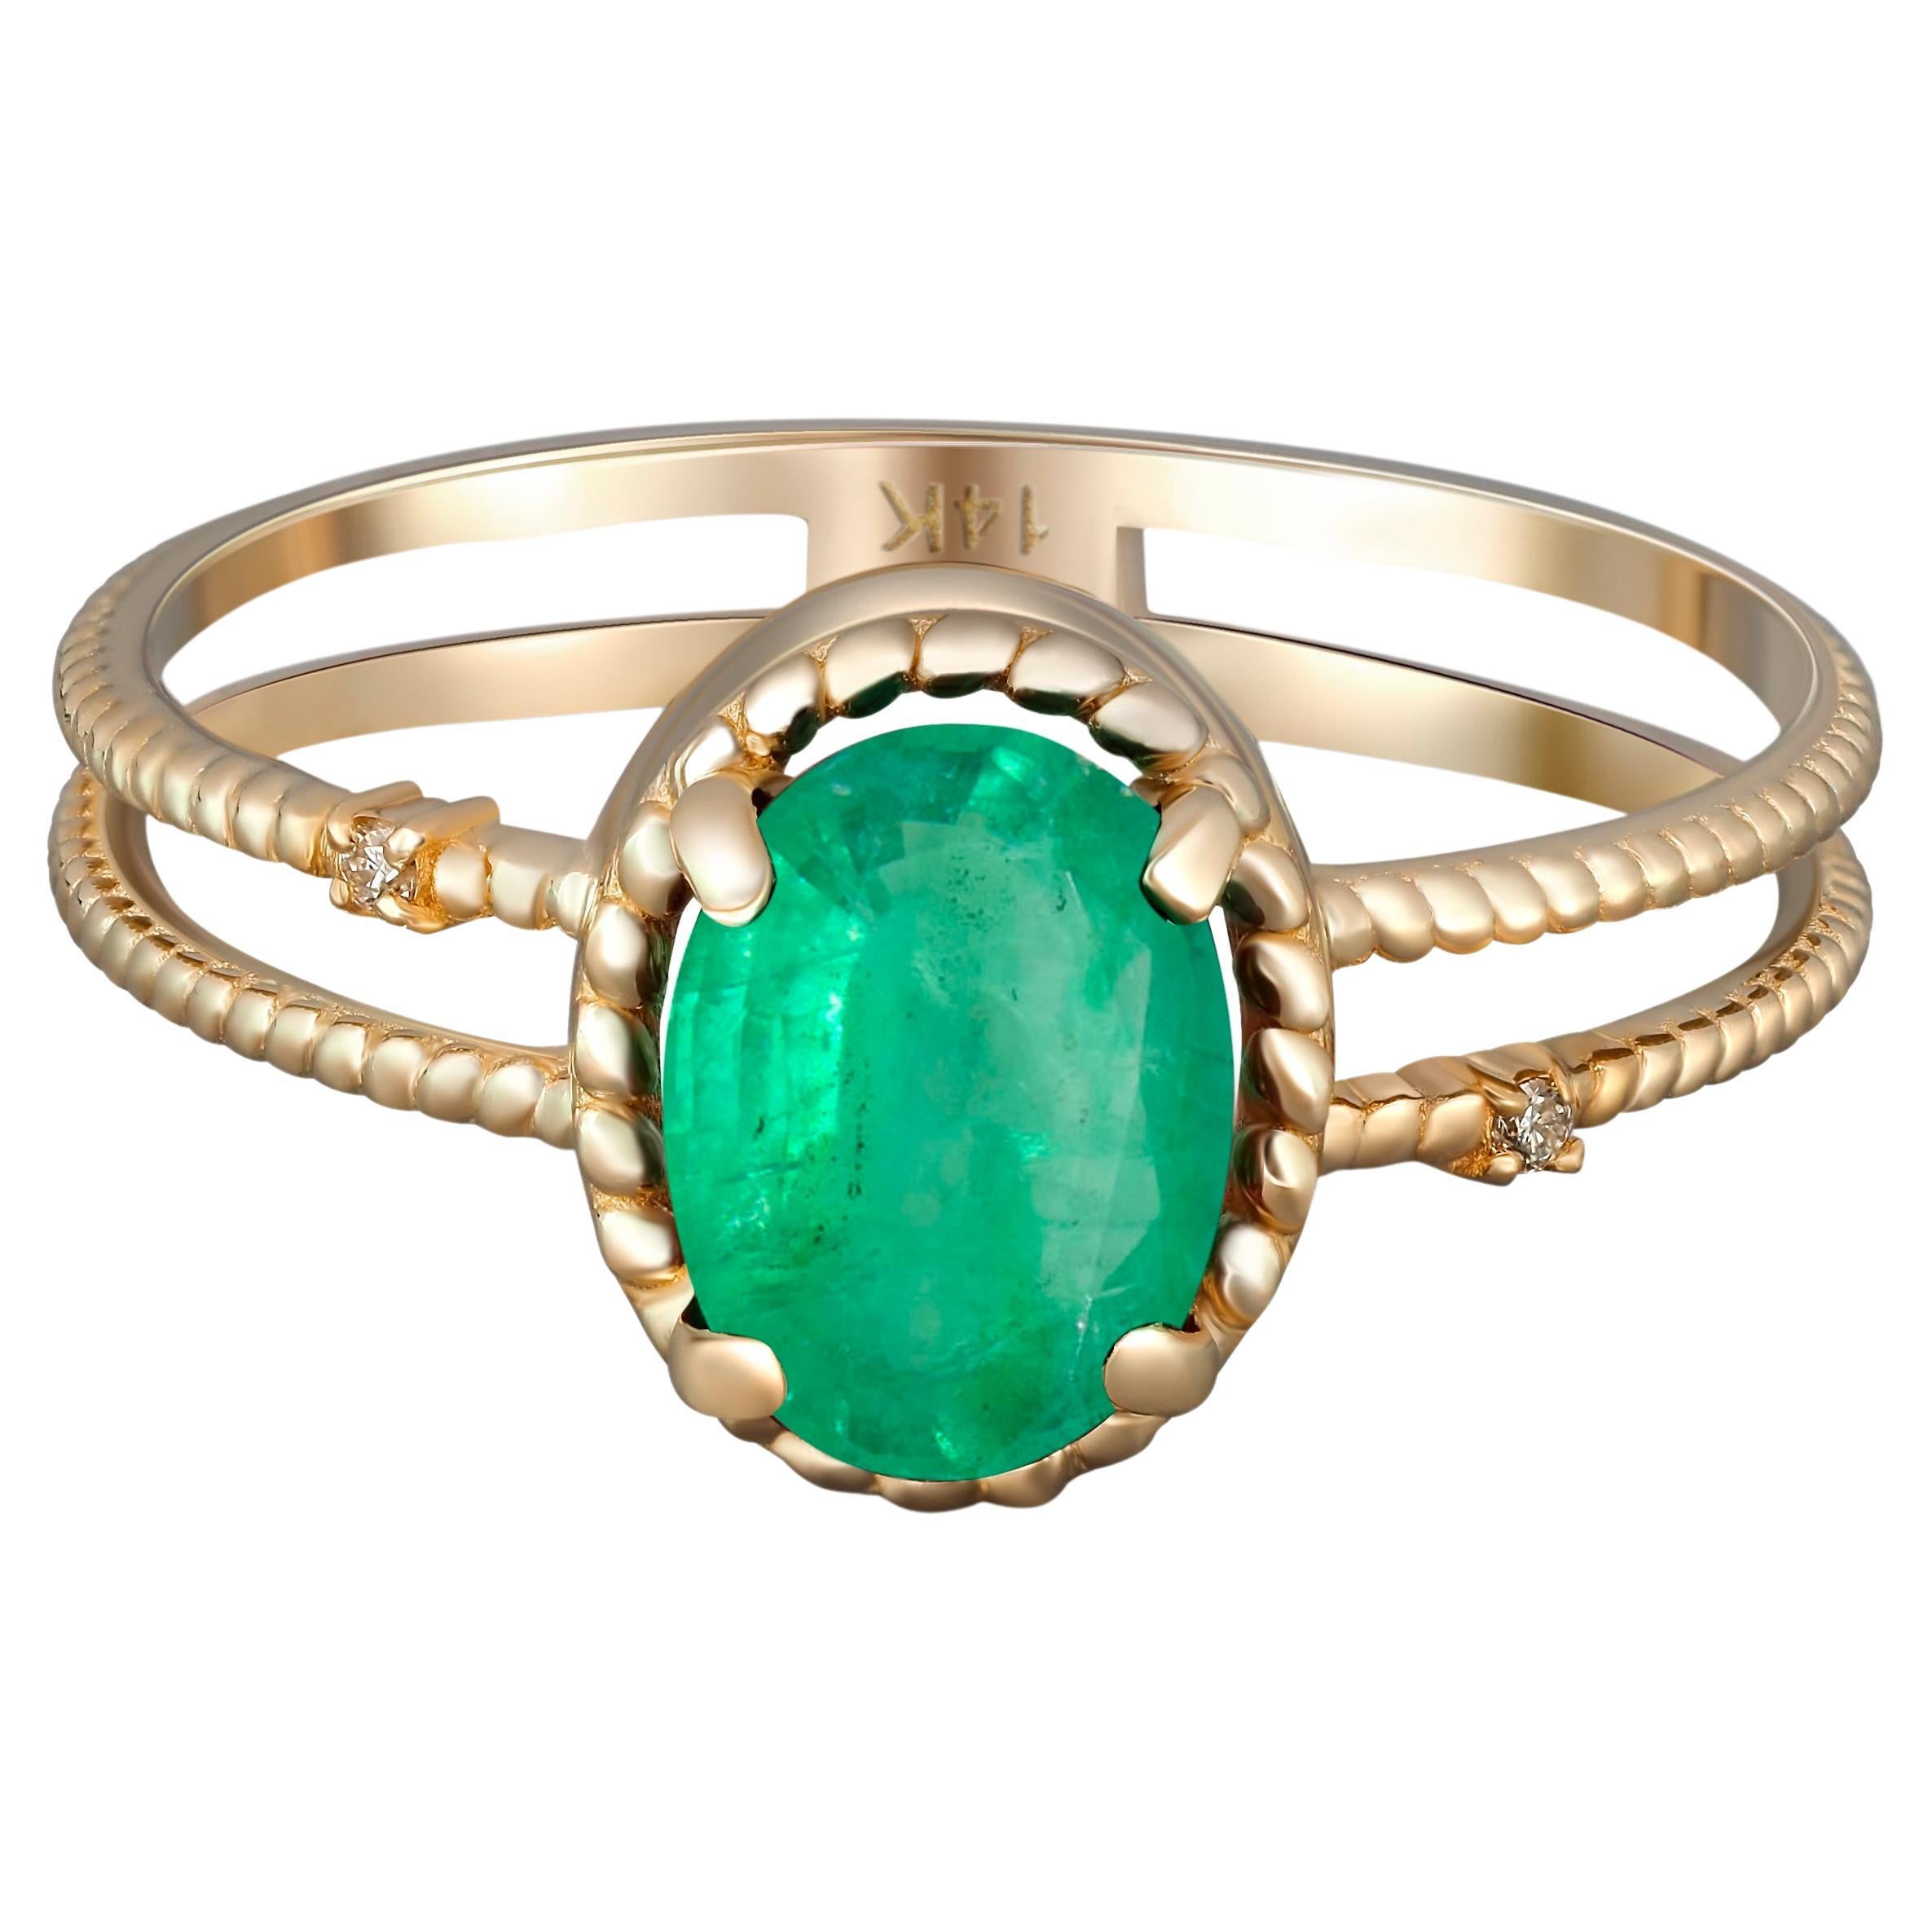 Emerald Gold Ring, Oval Emerald Ring, 14k Gold Ring with Emerald